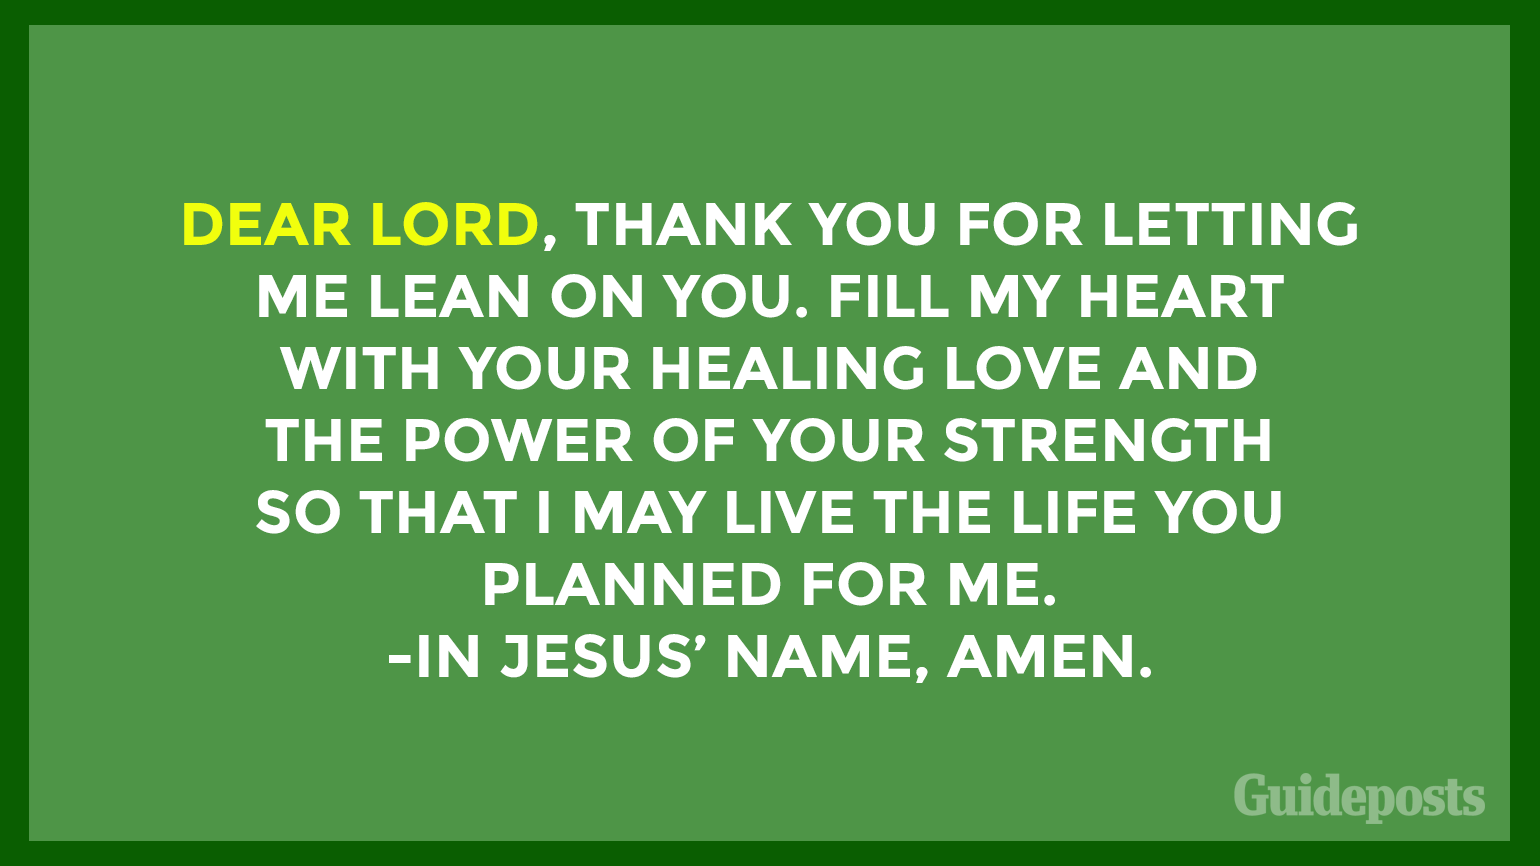 Dear Lord, thank You for letting me lean on You. Fill my heart with Your healing love and the power of Your strength so that I may live the life You planned for me. In Jesus’ name, Amen.